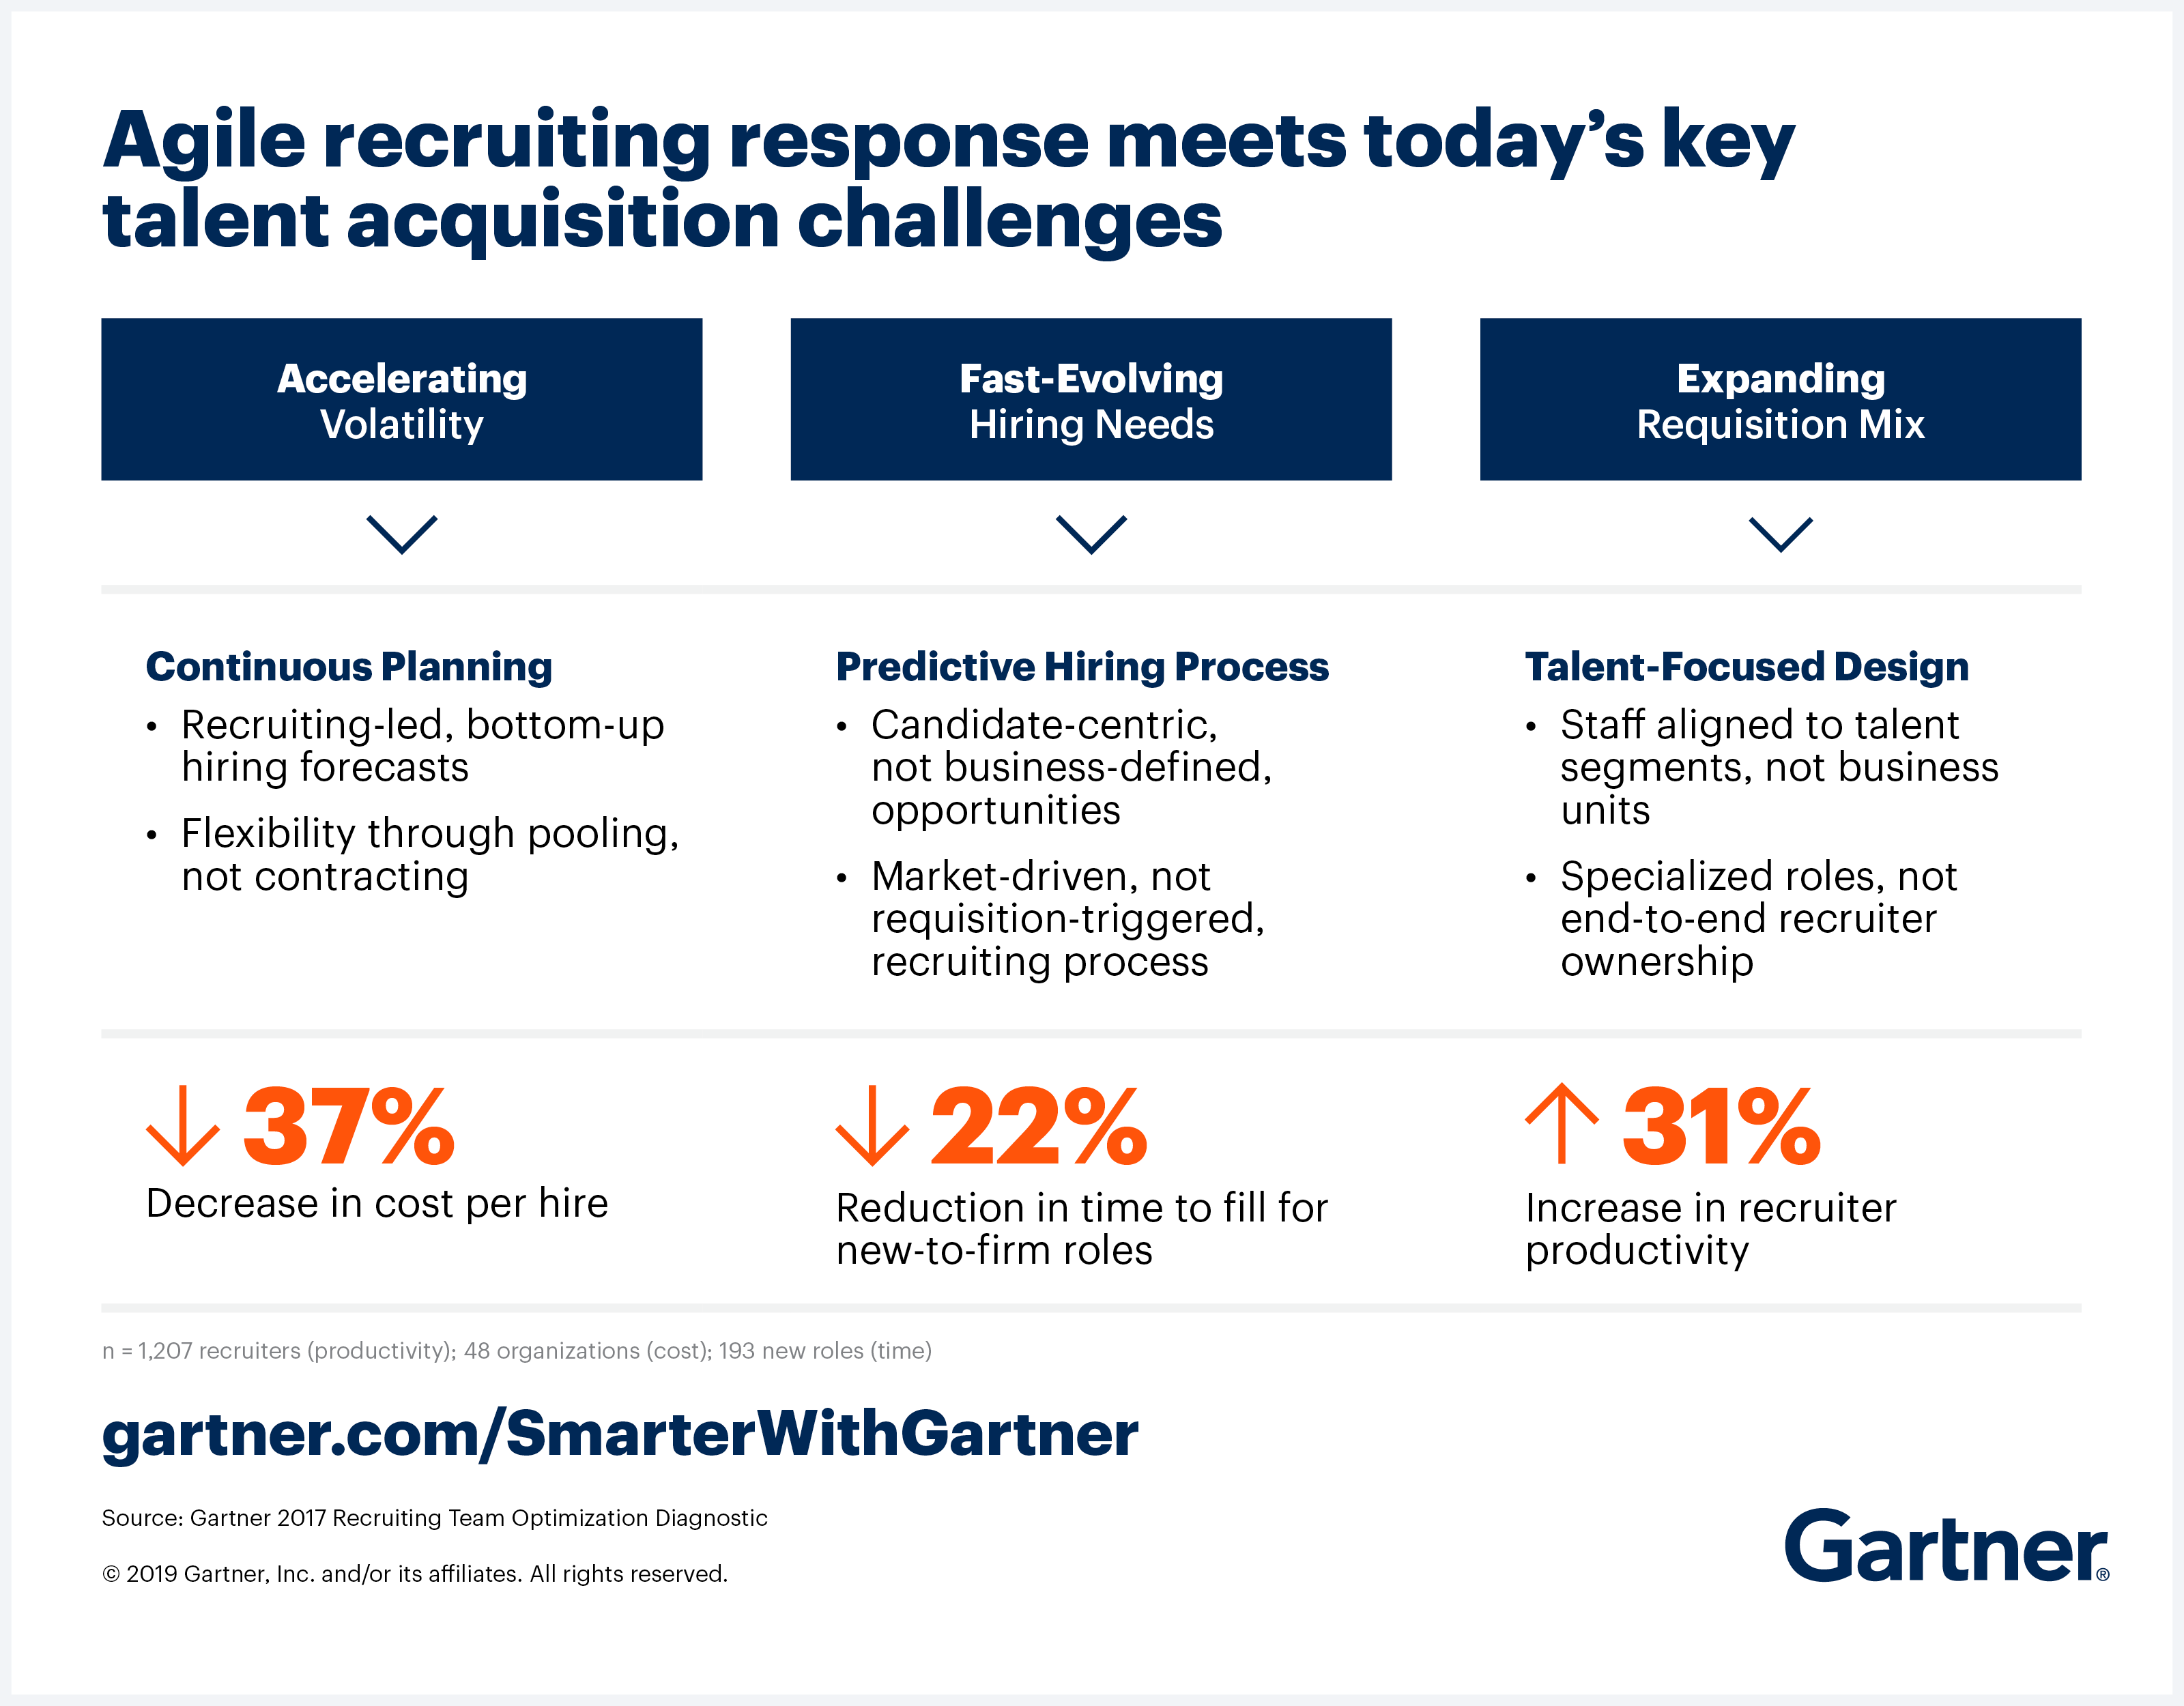 Gartner illustrates how agile recruiting response meets today's key talent acquisition challenges. 